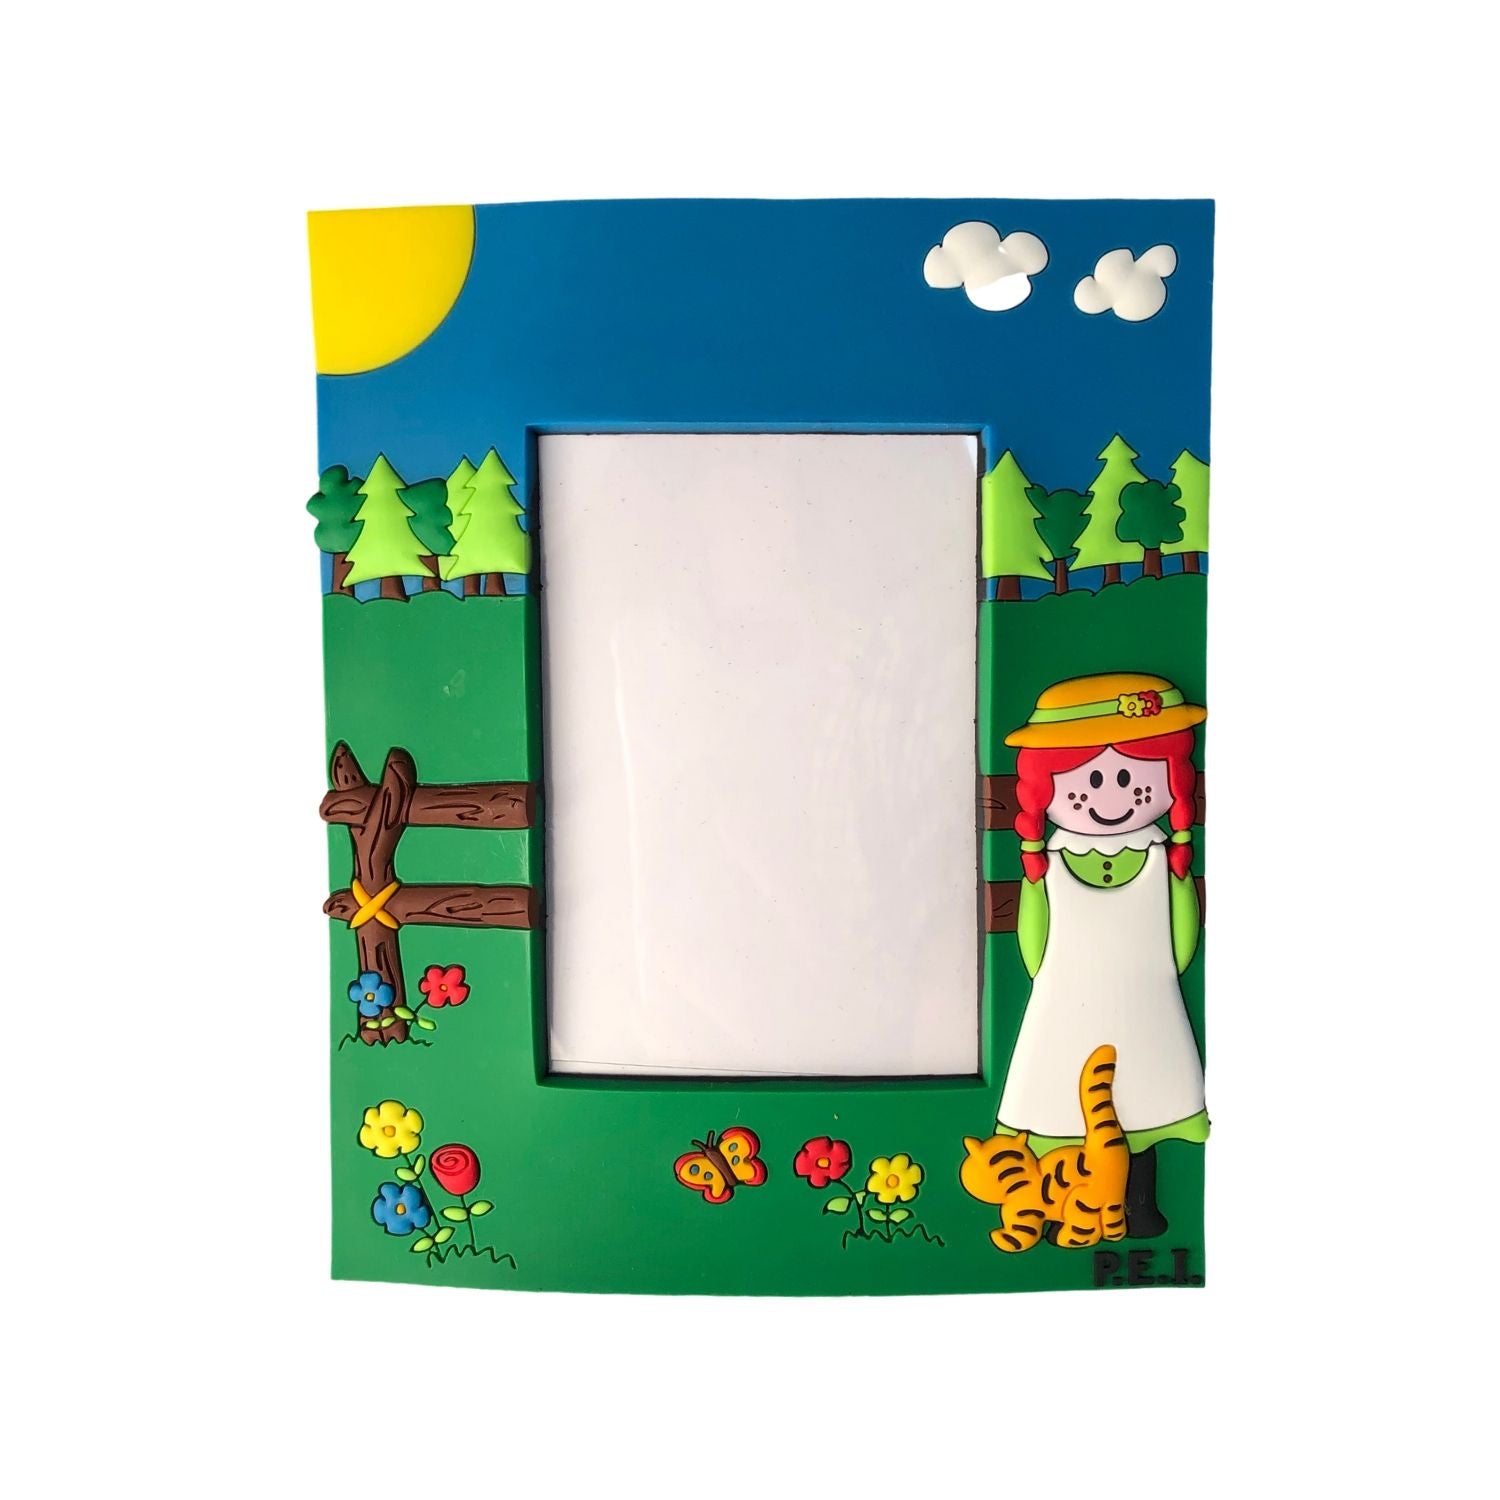 Lil' Anne PVC Picture Frame